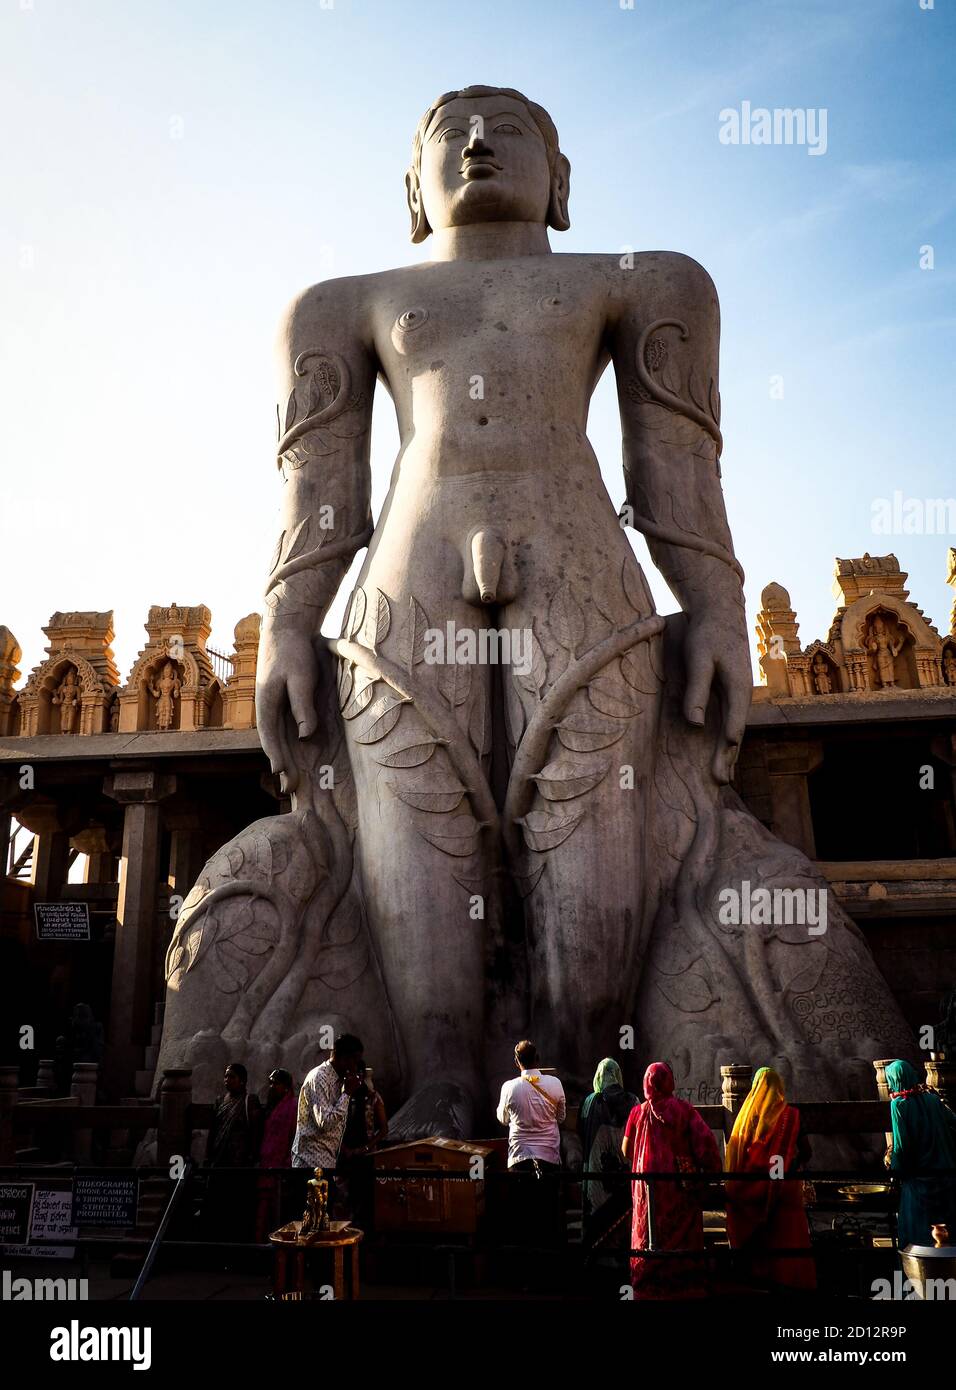 Statue of Jain god in sacred temple in Shravanabelagola in South of India during the morning pooja ritual. Stock Photo